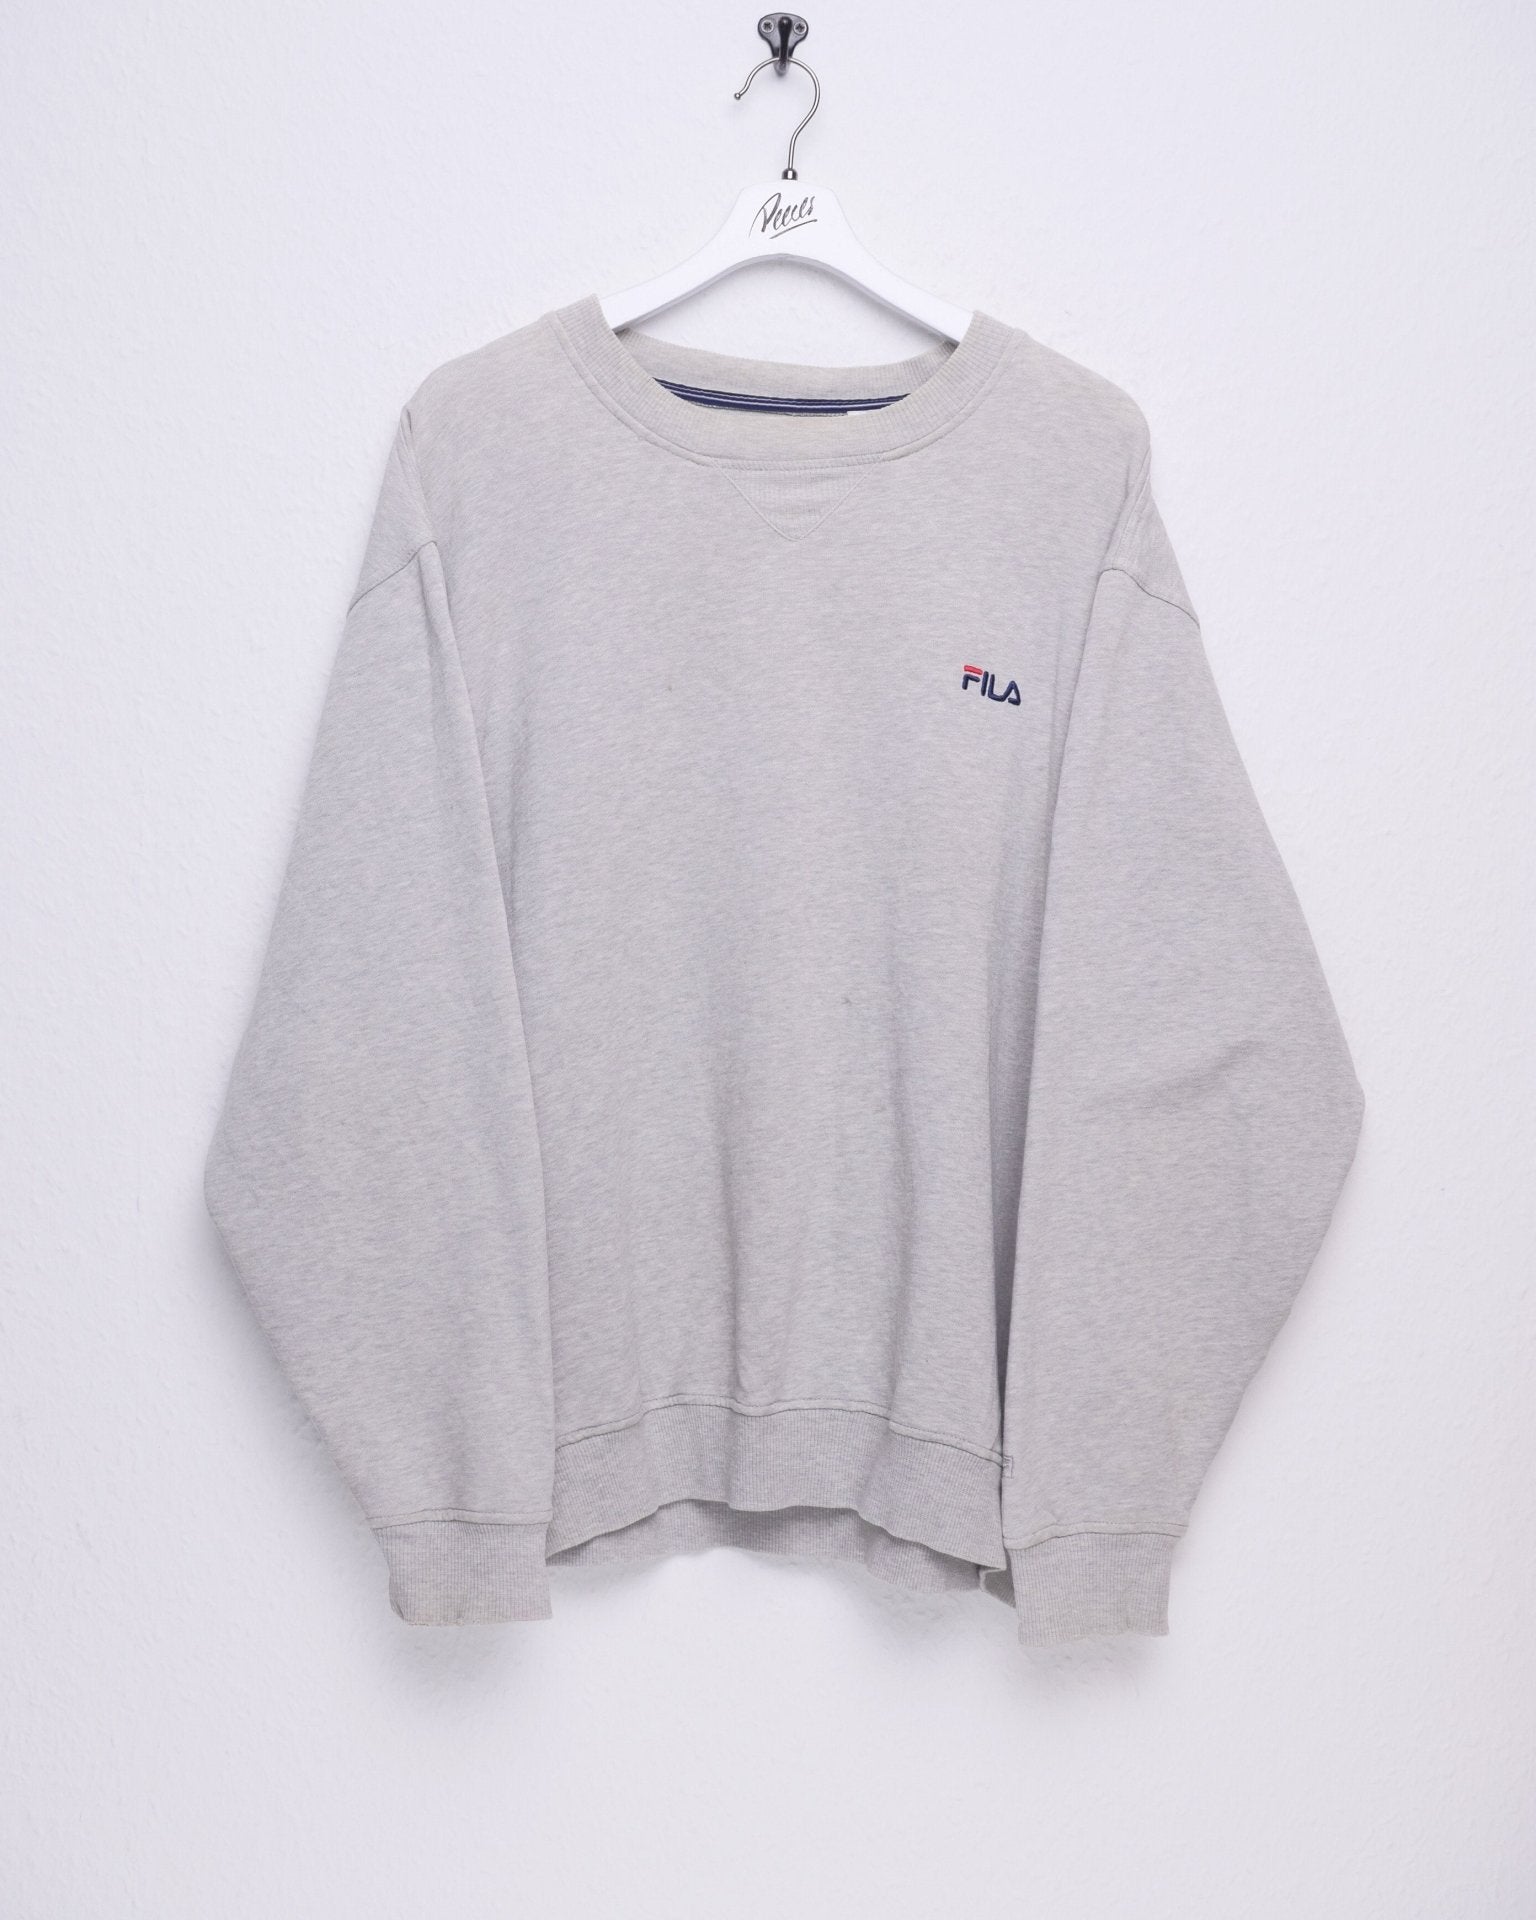 fila embroidered Spellout grey Sweater - Peeces